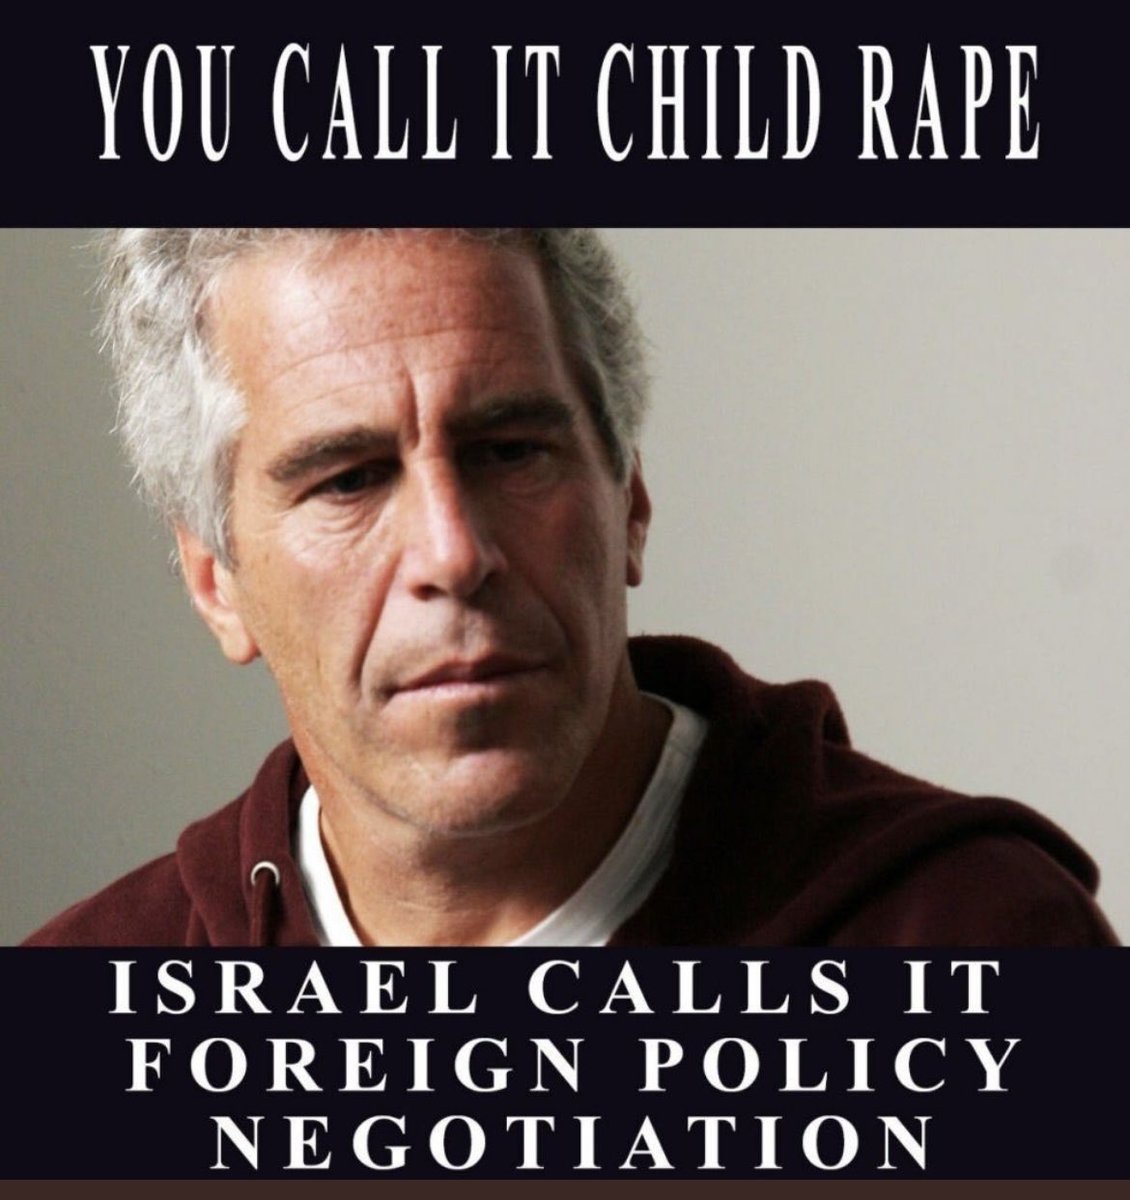 Yes Biden could stop the genocide with one phone call. Too bad Zionists own the Pedos.